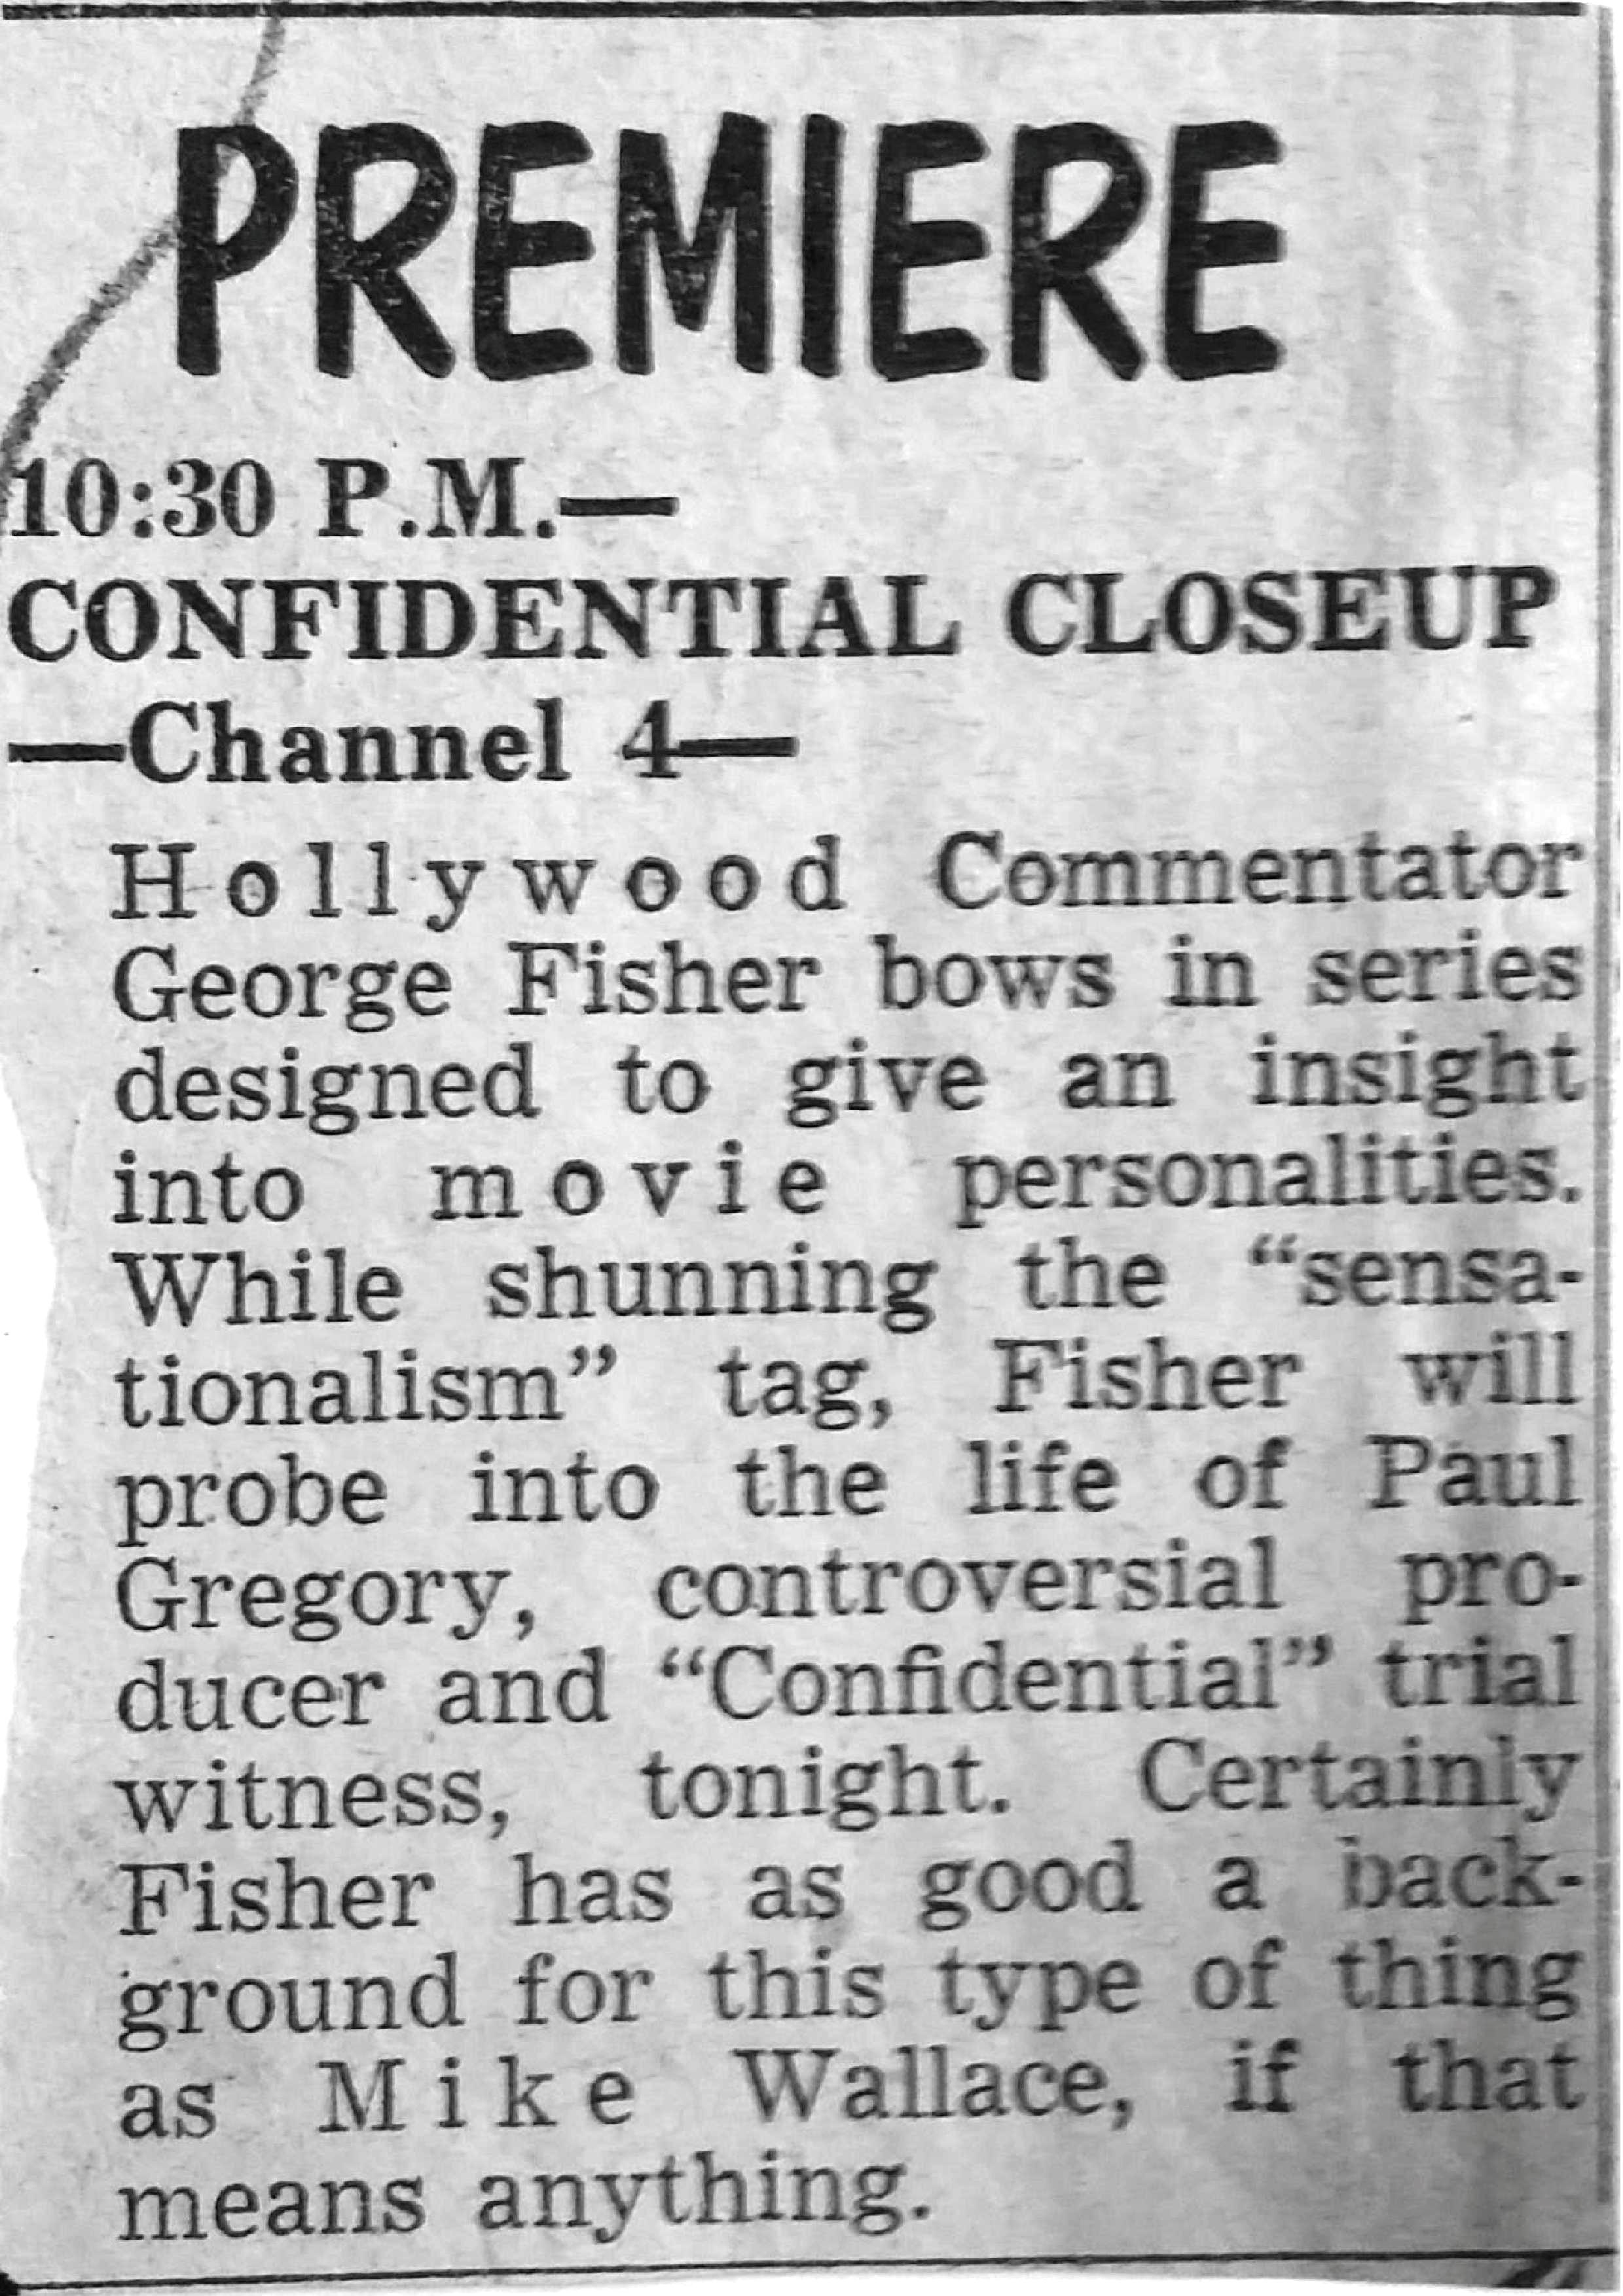 George Fischer   Confidential Closeup on Ch. 4-page-001.jpg